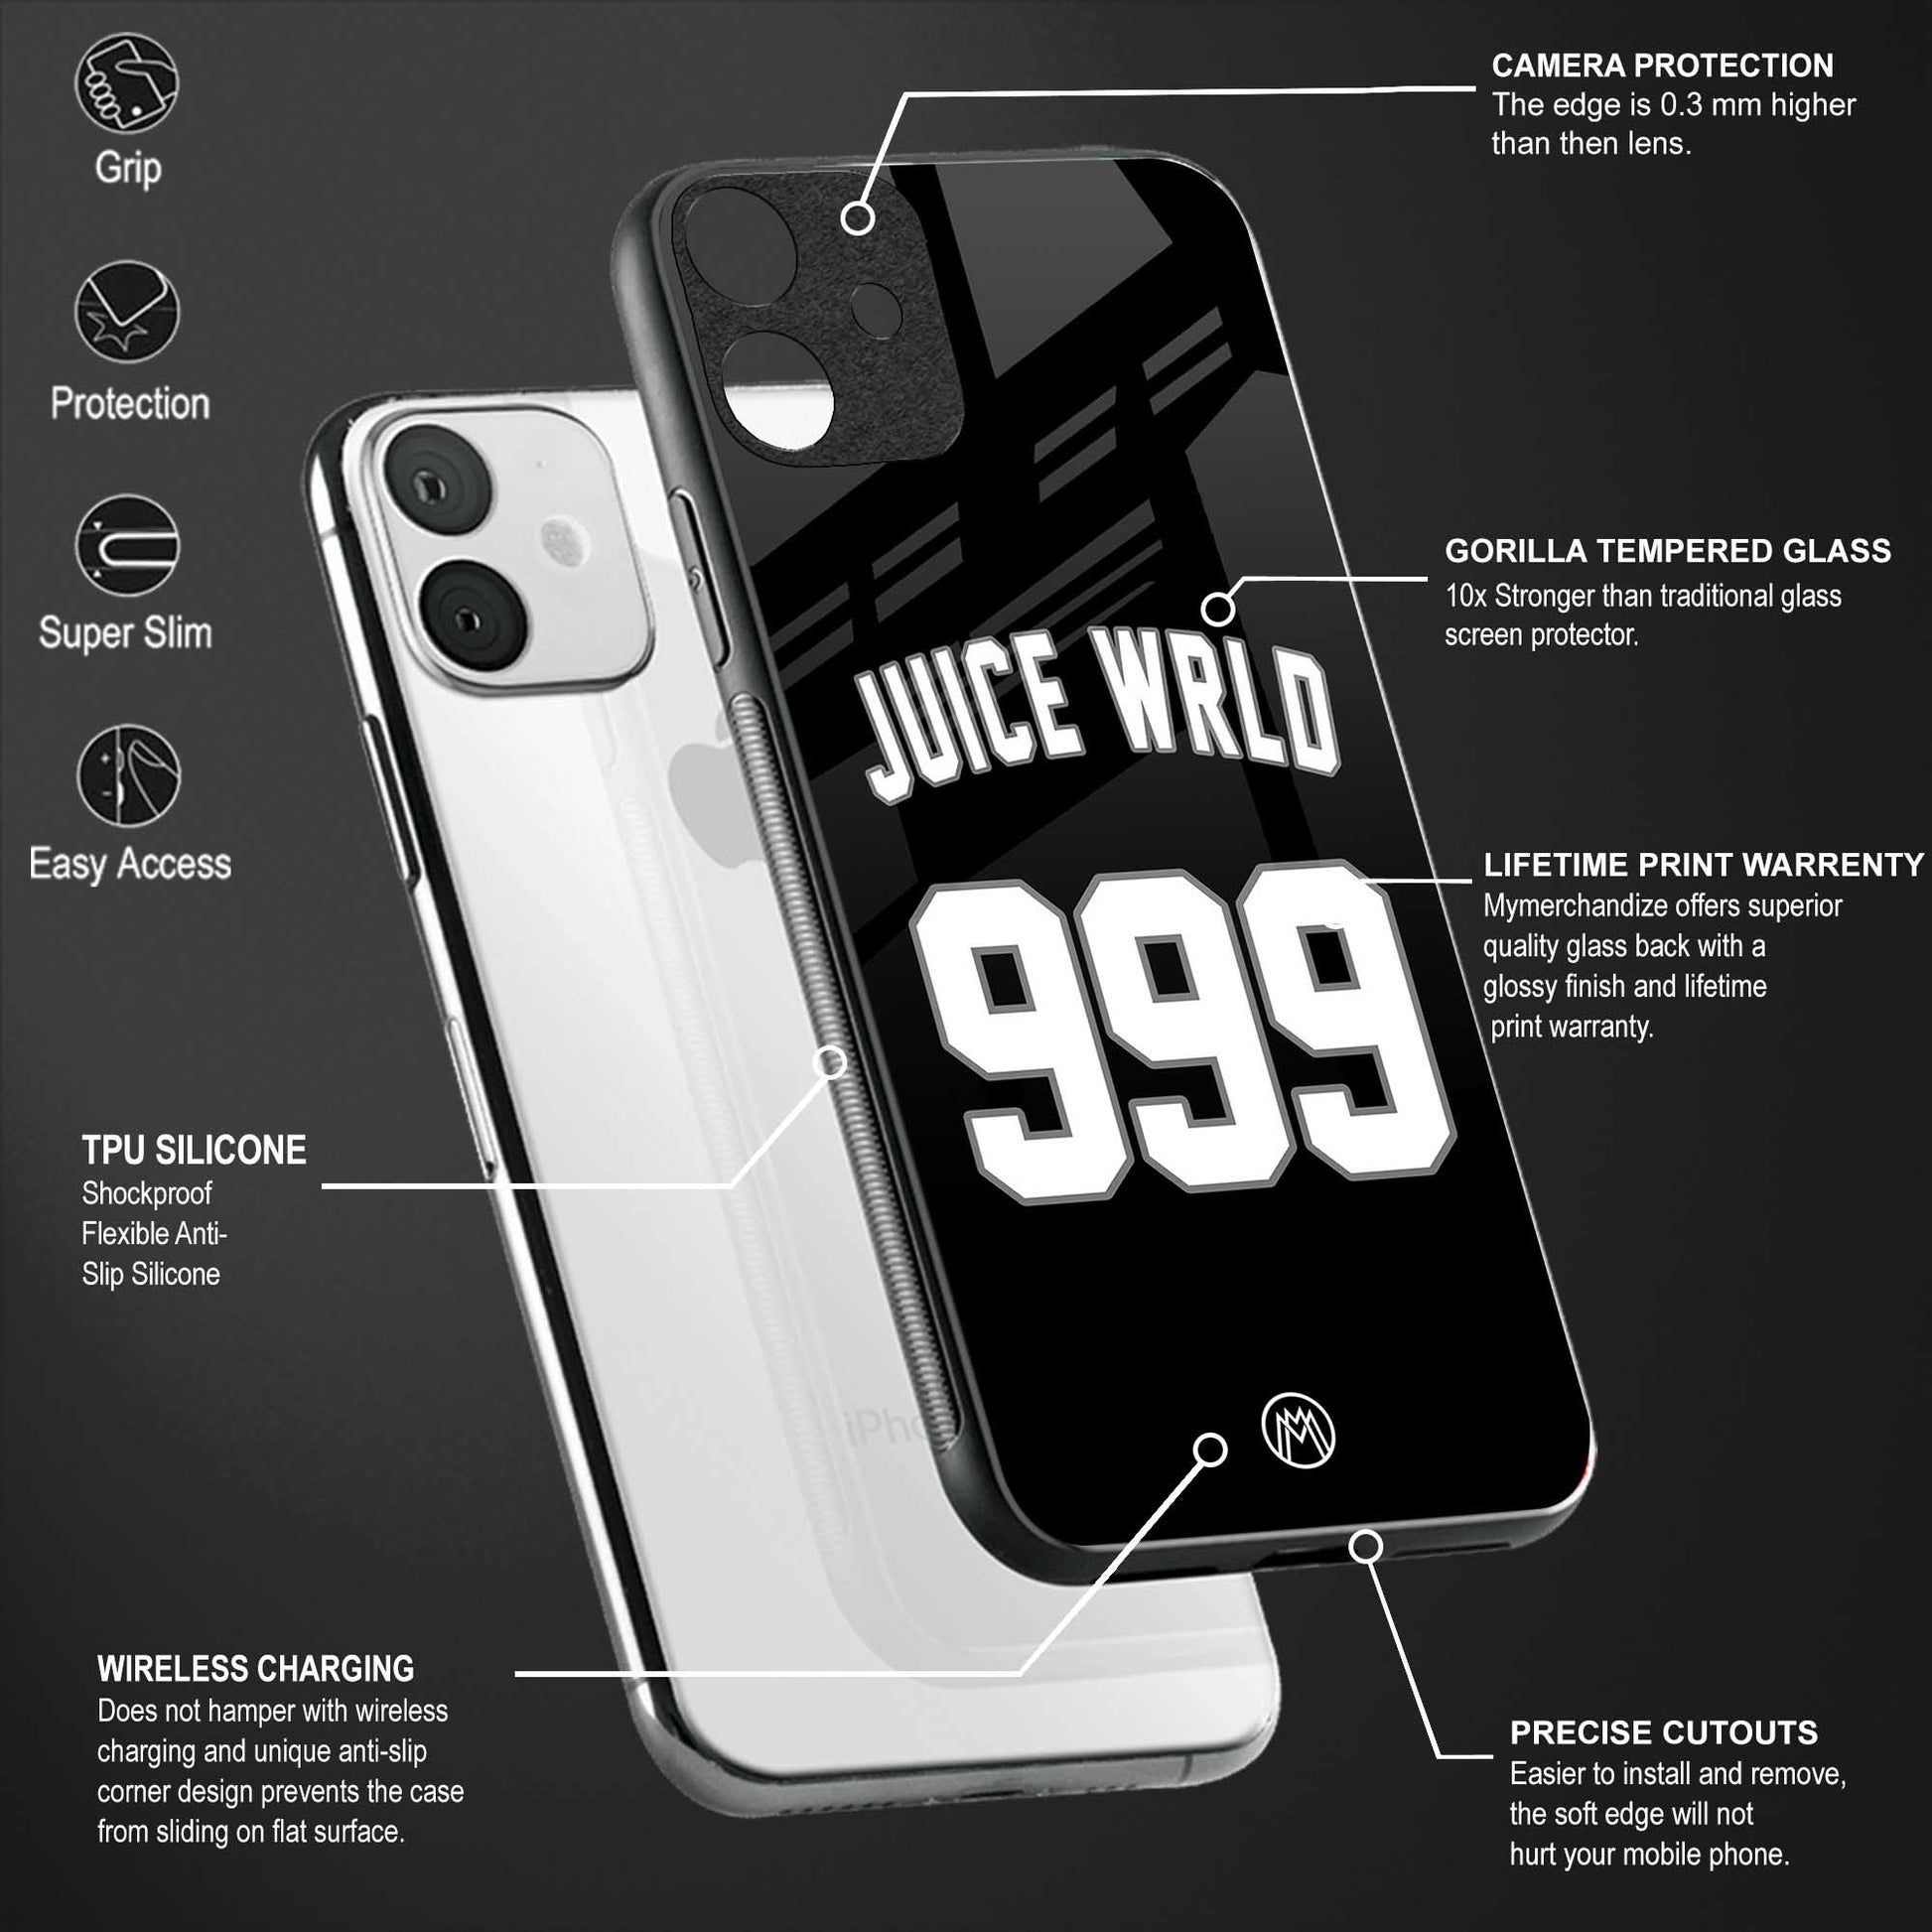 juice wrld 999 back phone cover | glass case for redmi note 11 pro plus 4g/5g